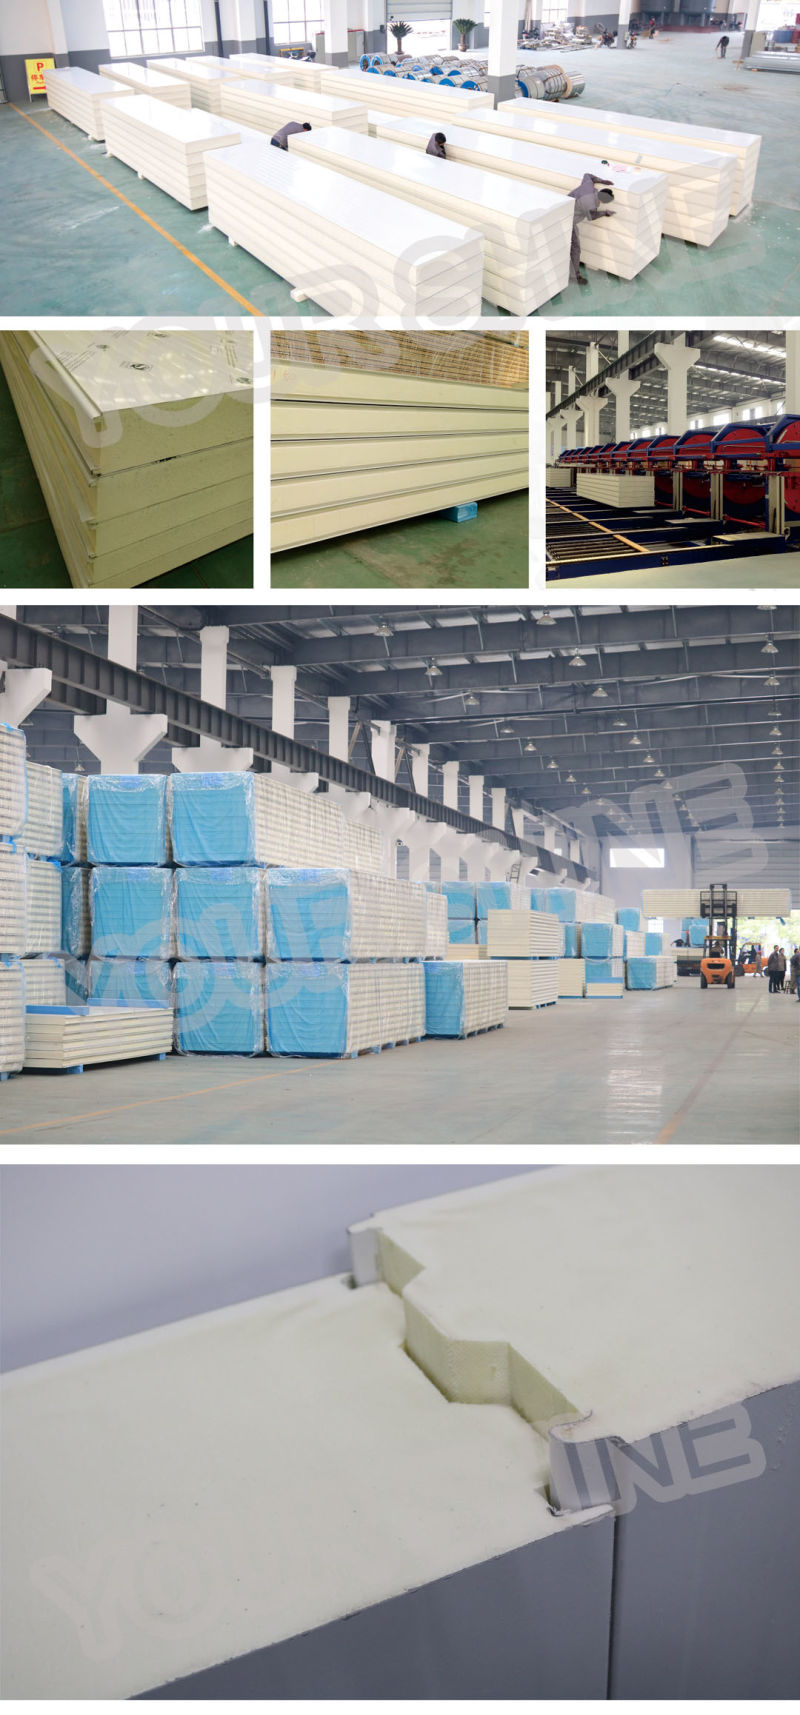 Easy Assembled Cold Storage Polyurethane Roof Panel